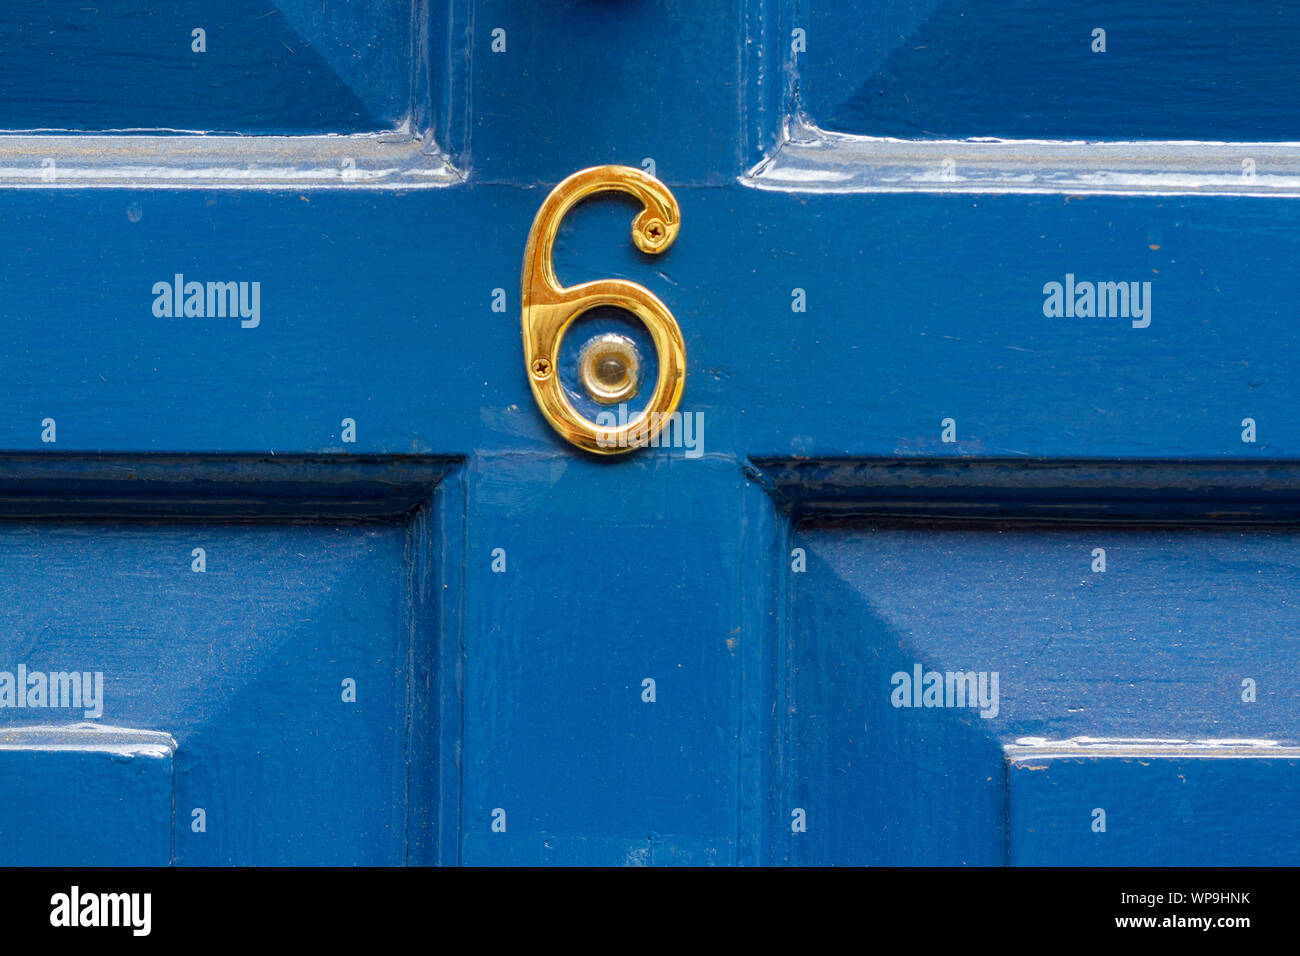 House number 6 in gold around a peephole Stock Photo